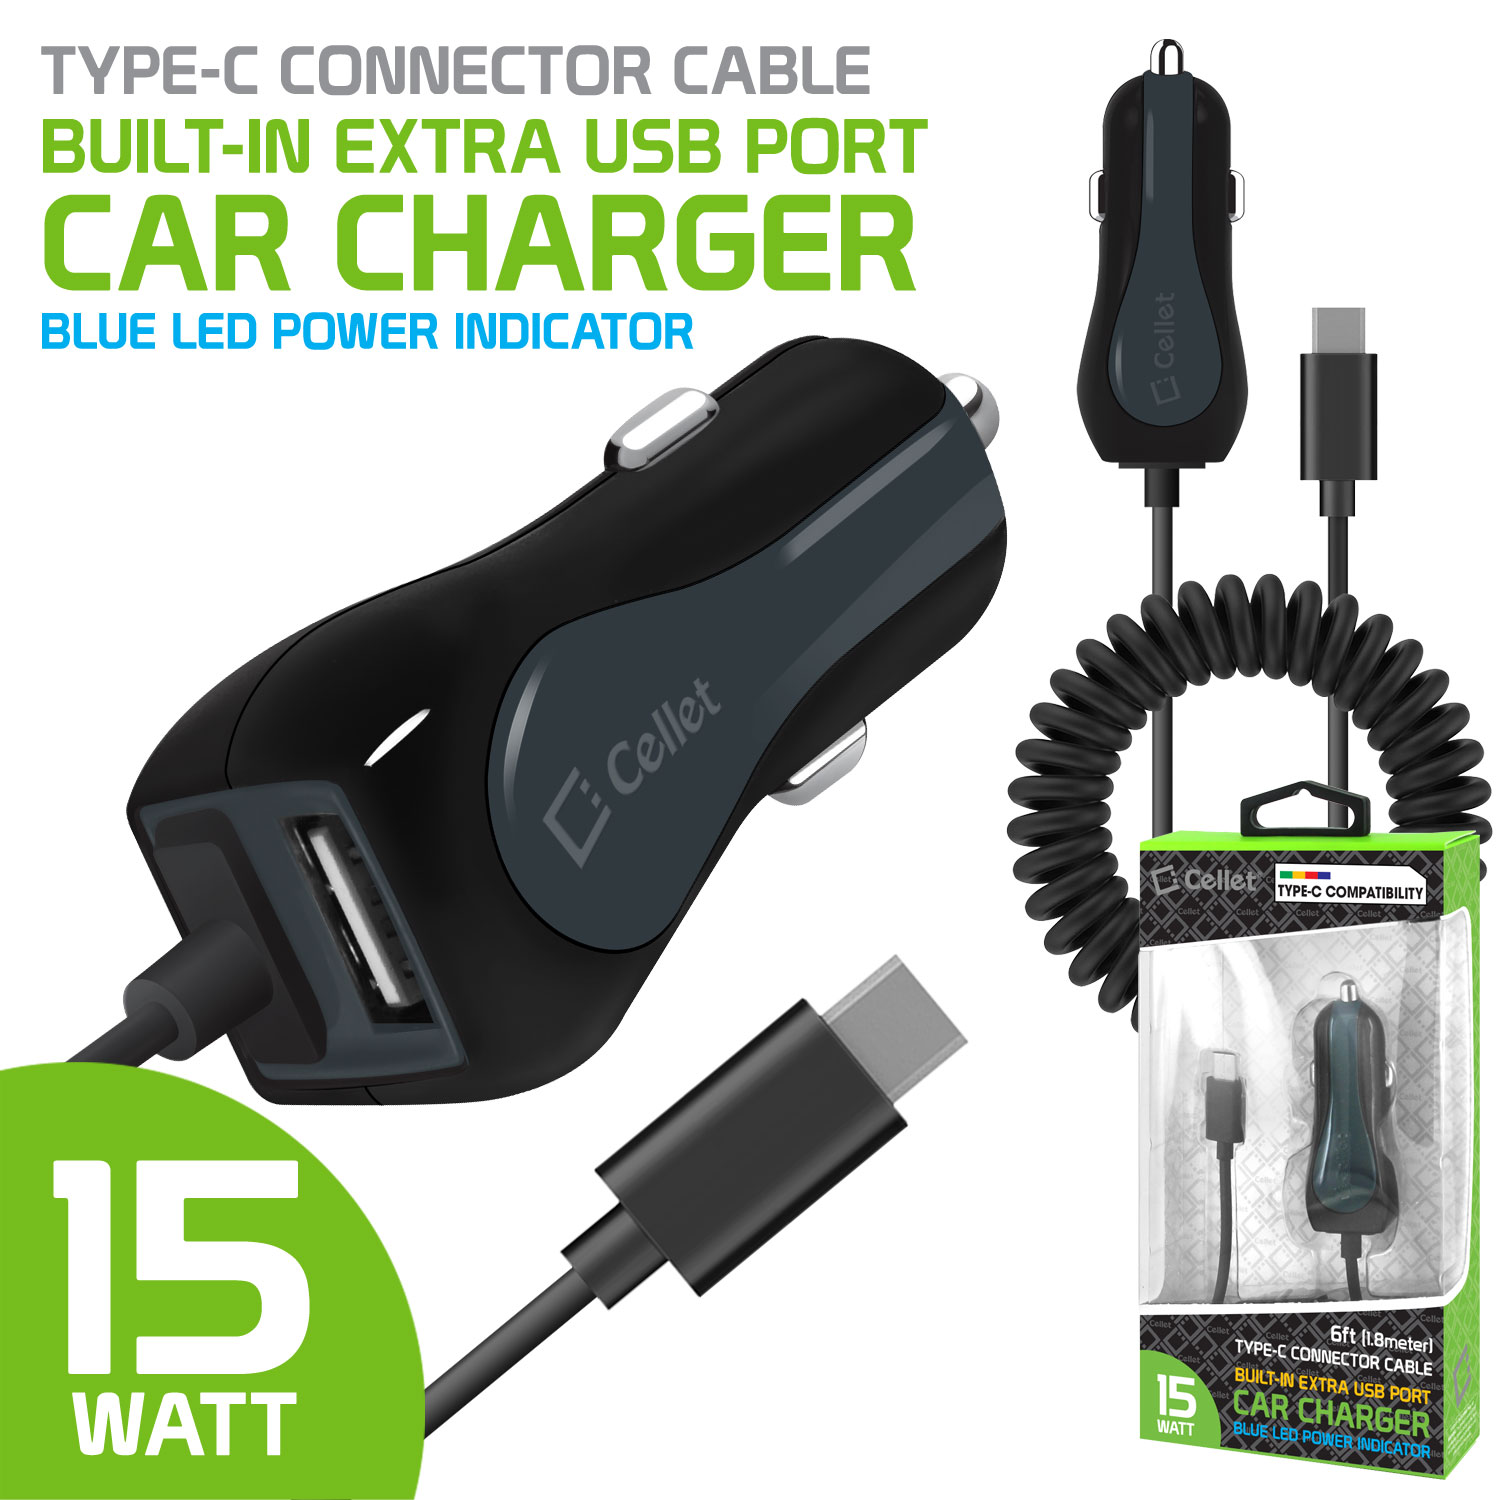 Samsung Galaxy S9 / S9+ Plus Type C Car Charger - [15 Watt / 3 Amp] High Powered USB Type-C (USB-C) Car Charger with Extra USB Port [6 feet] and Atom Cloth for Samsung Galaxy S9 / S9+ Plus - image 3 of 9